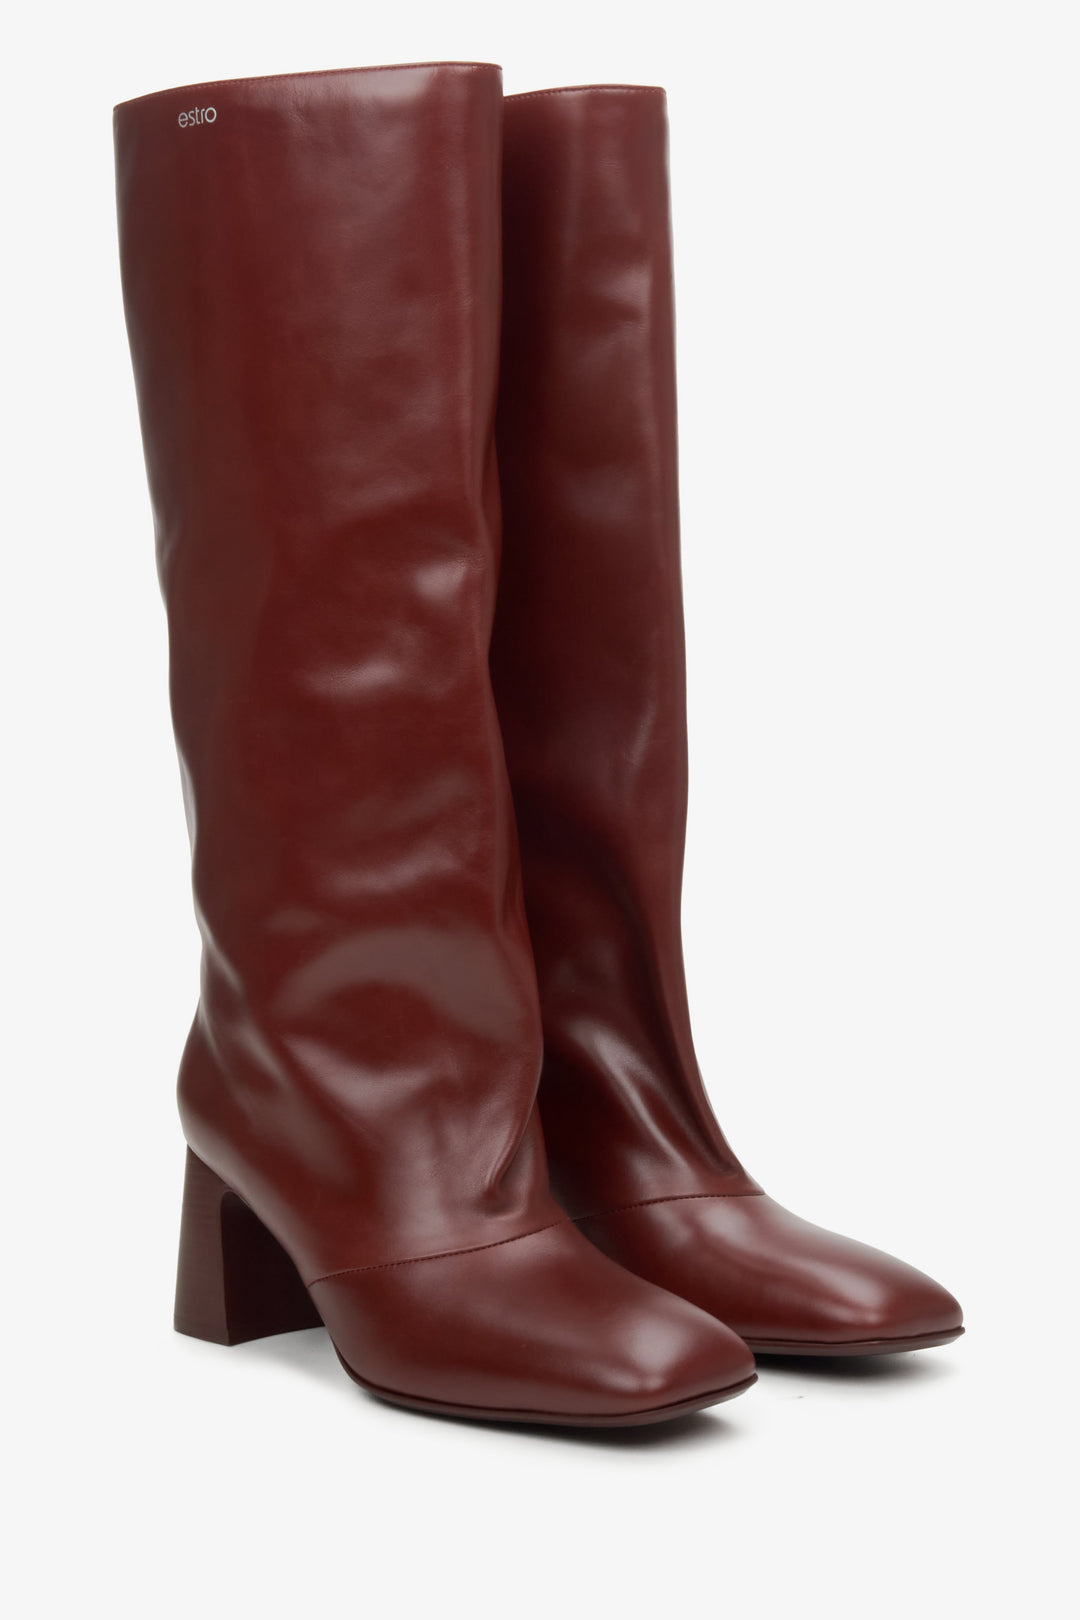 Women's burgundy leather high boots with overdimensioned shaft.